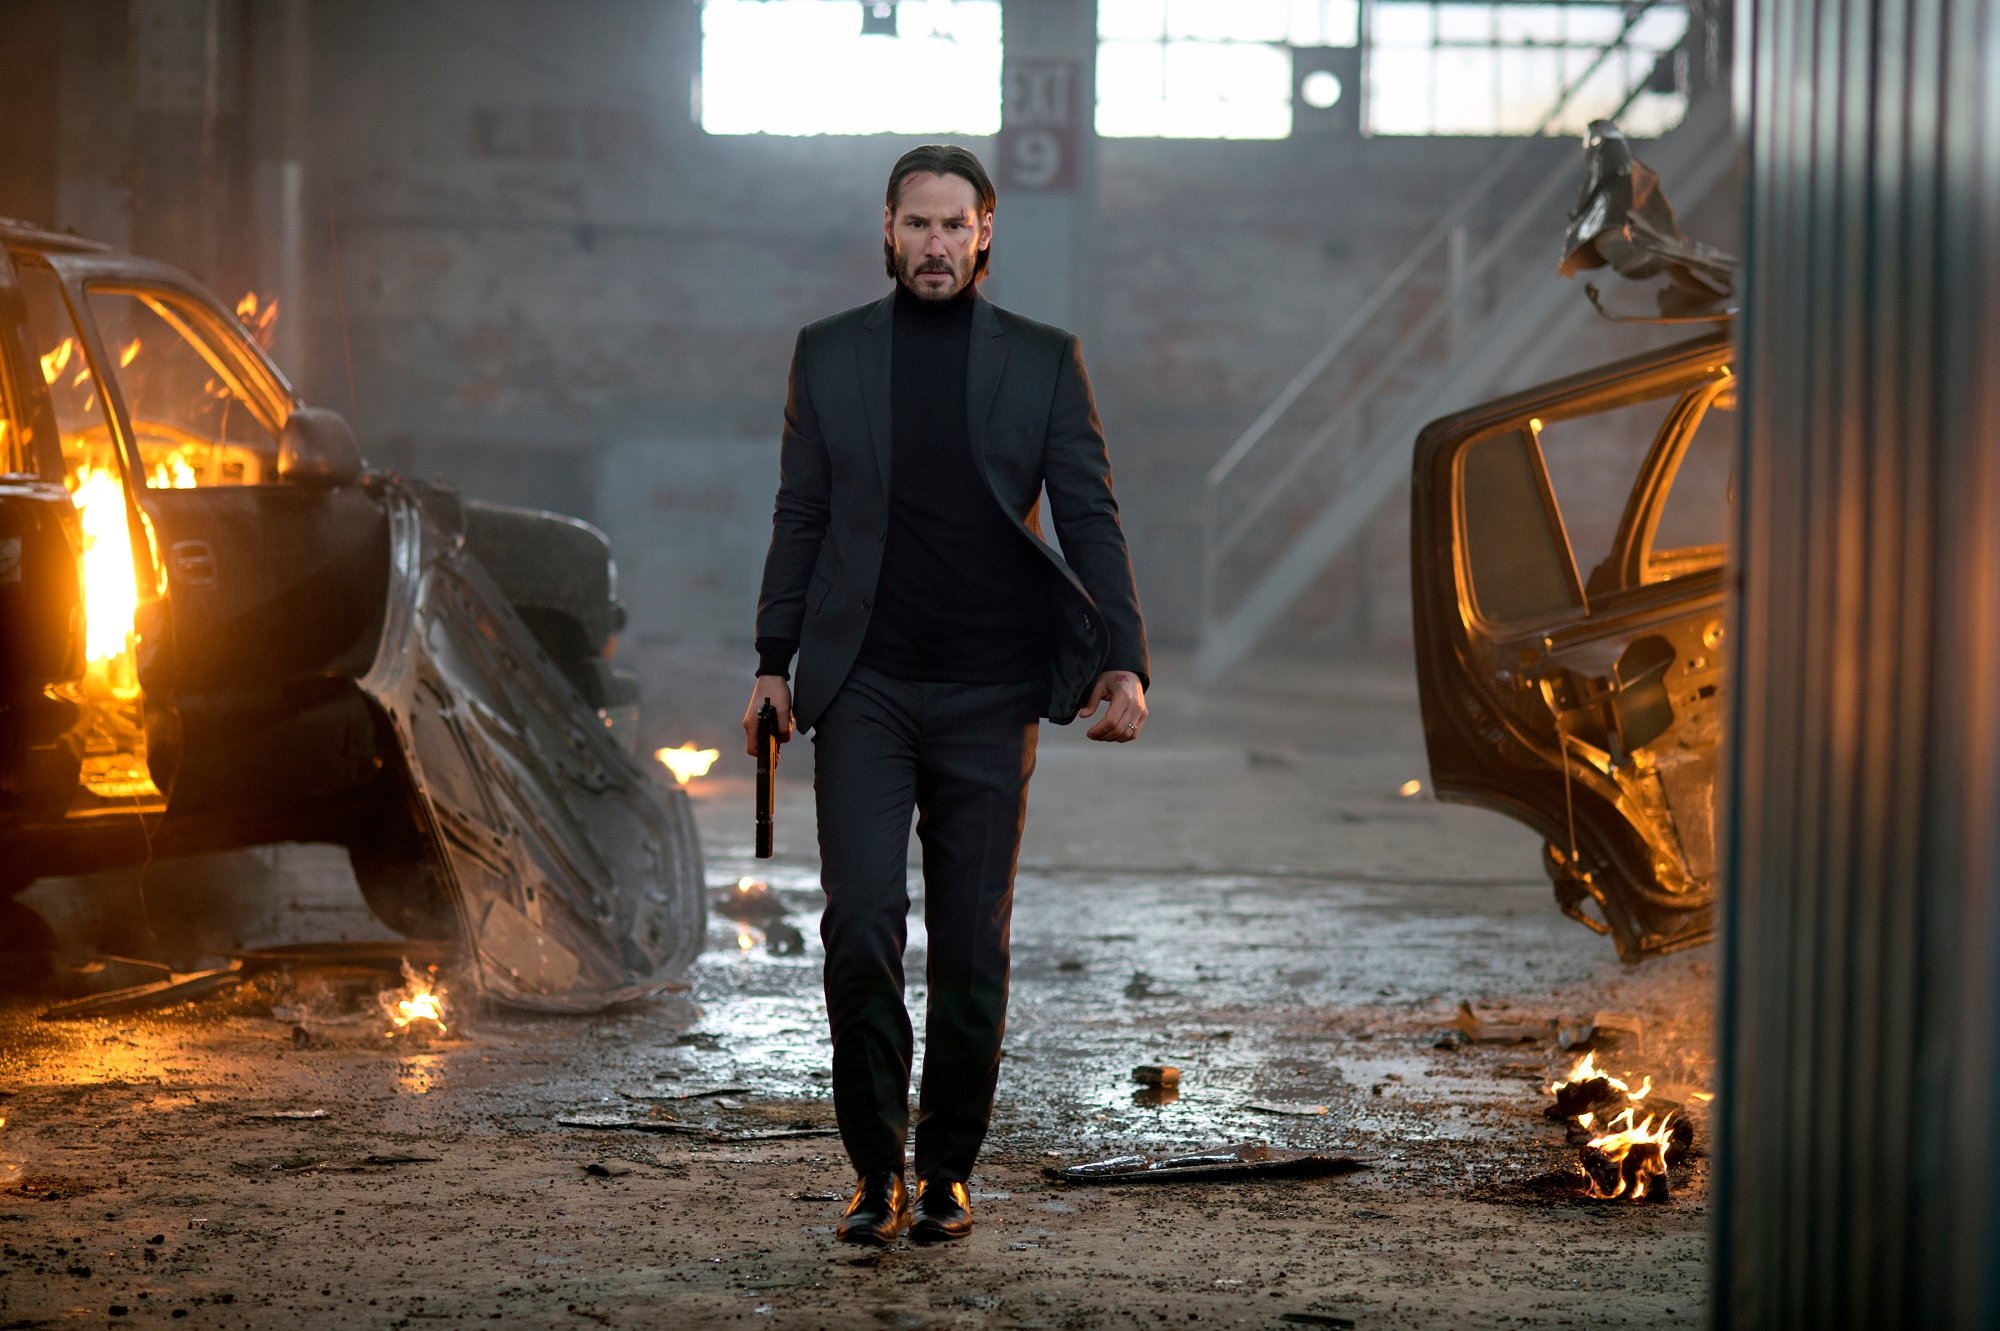 John Wick: Keanu Reeves walks through the aftermath of a fight